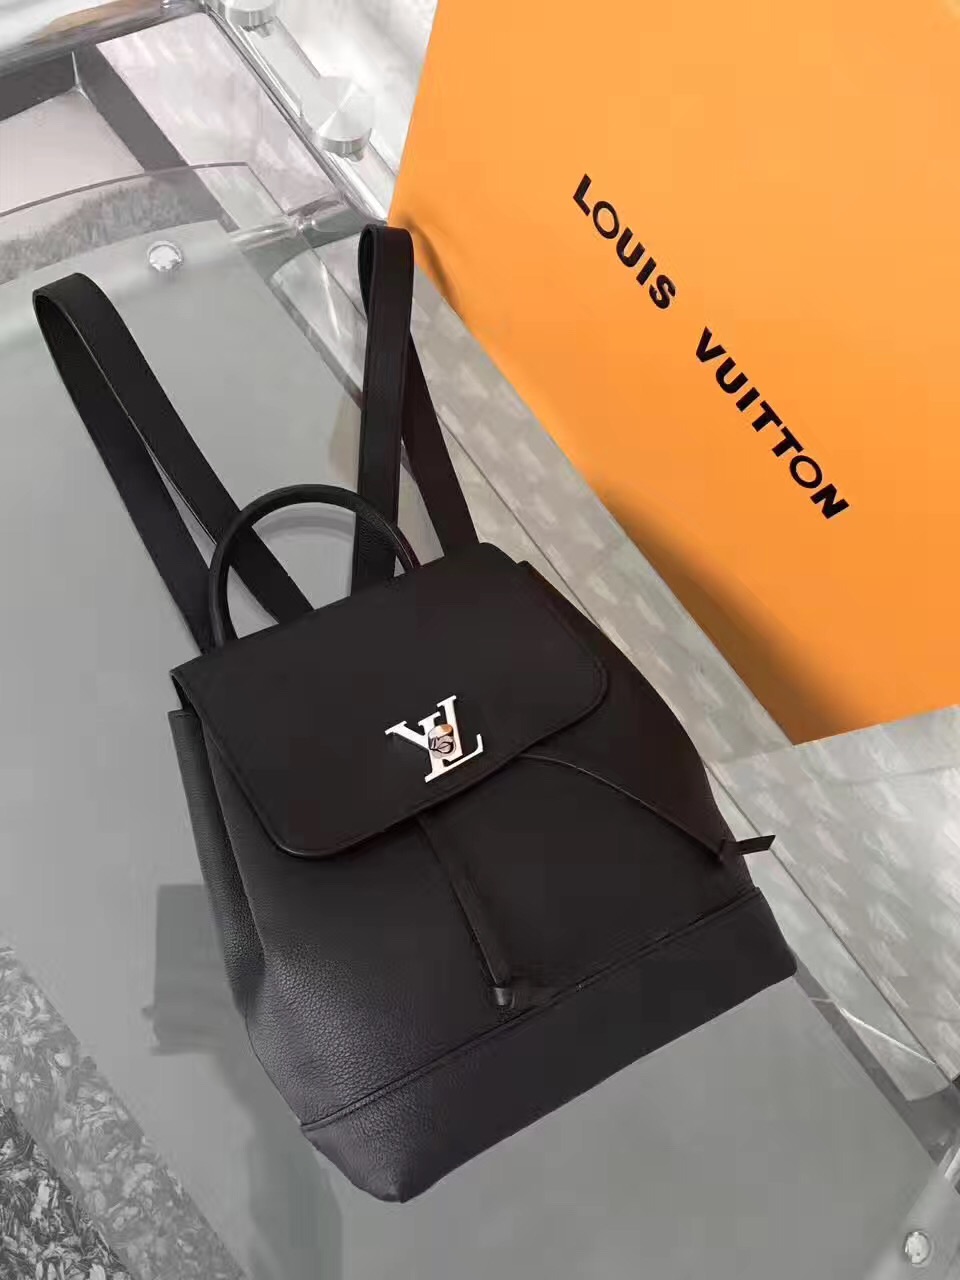 LV Louis Vuitton backpack small leather black handbags